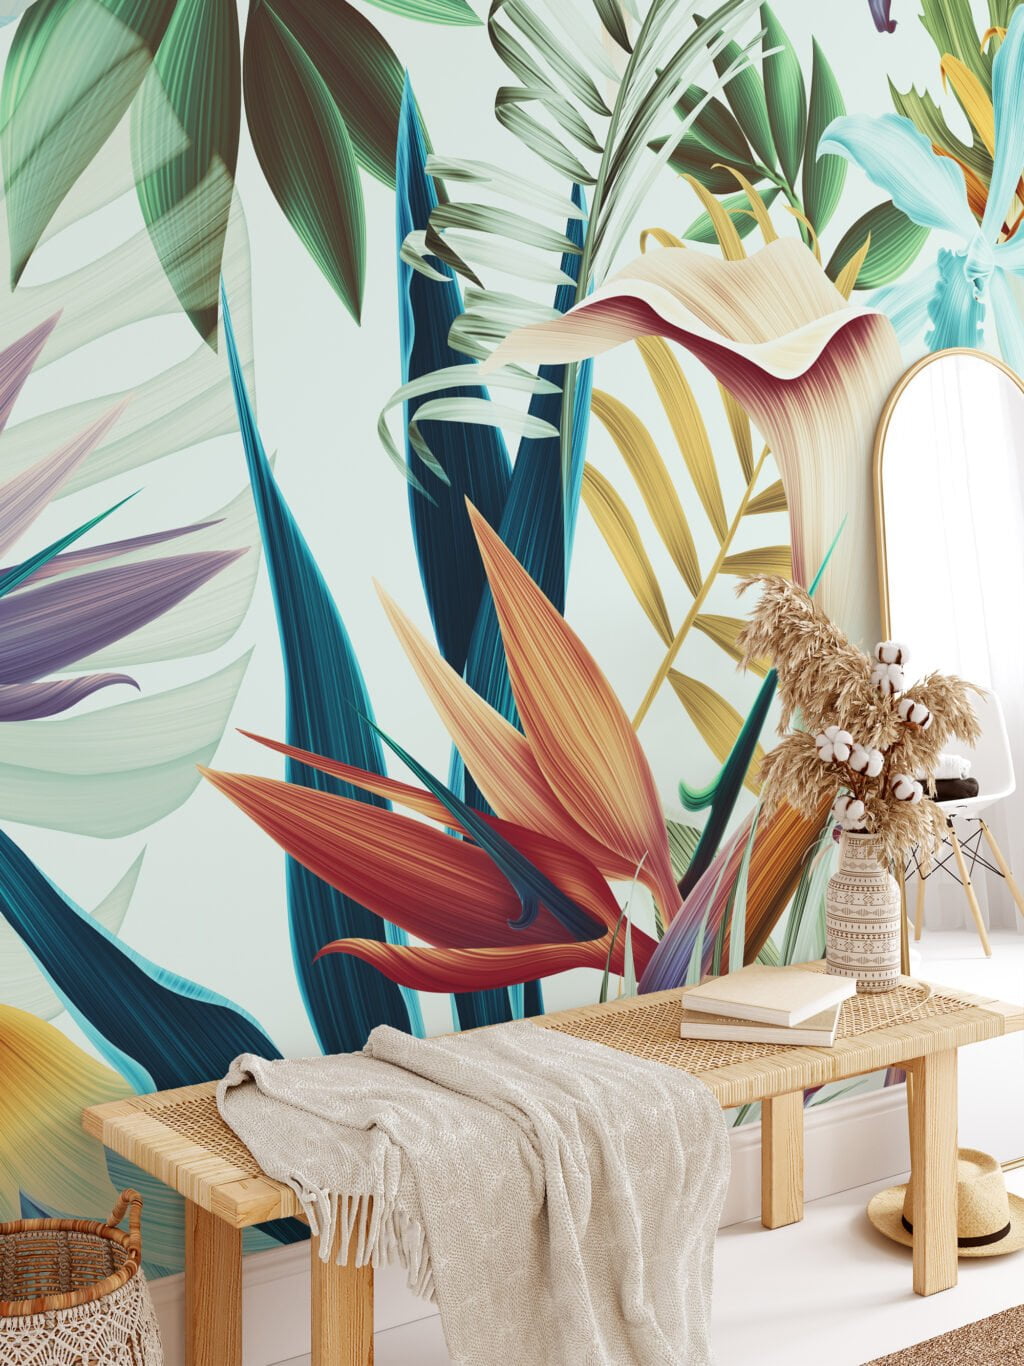 Large Tropical Floral Wallpaper, Exotic and Lush Peel and Stick Removable Wall Mural, Self Adhesive Wallpaper for a Relaxing Oasis